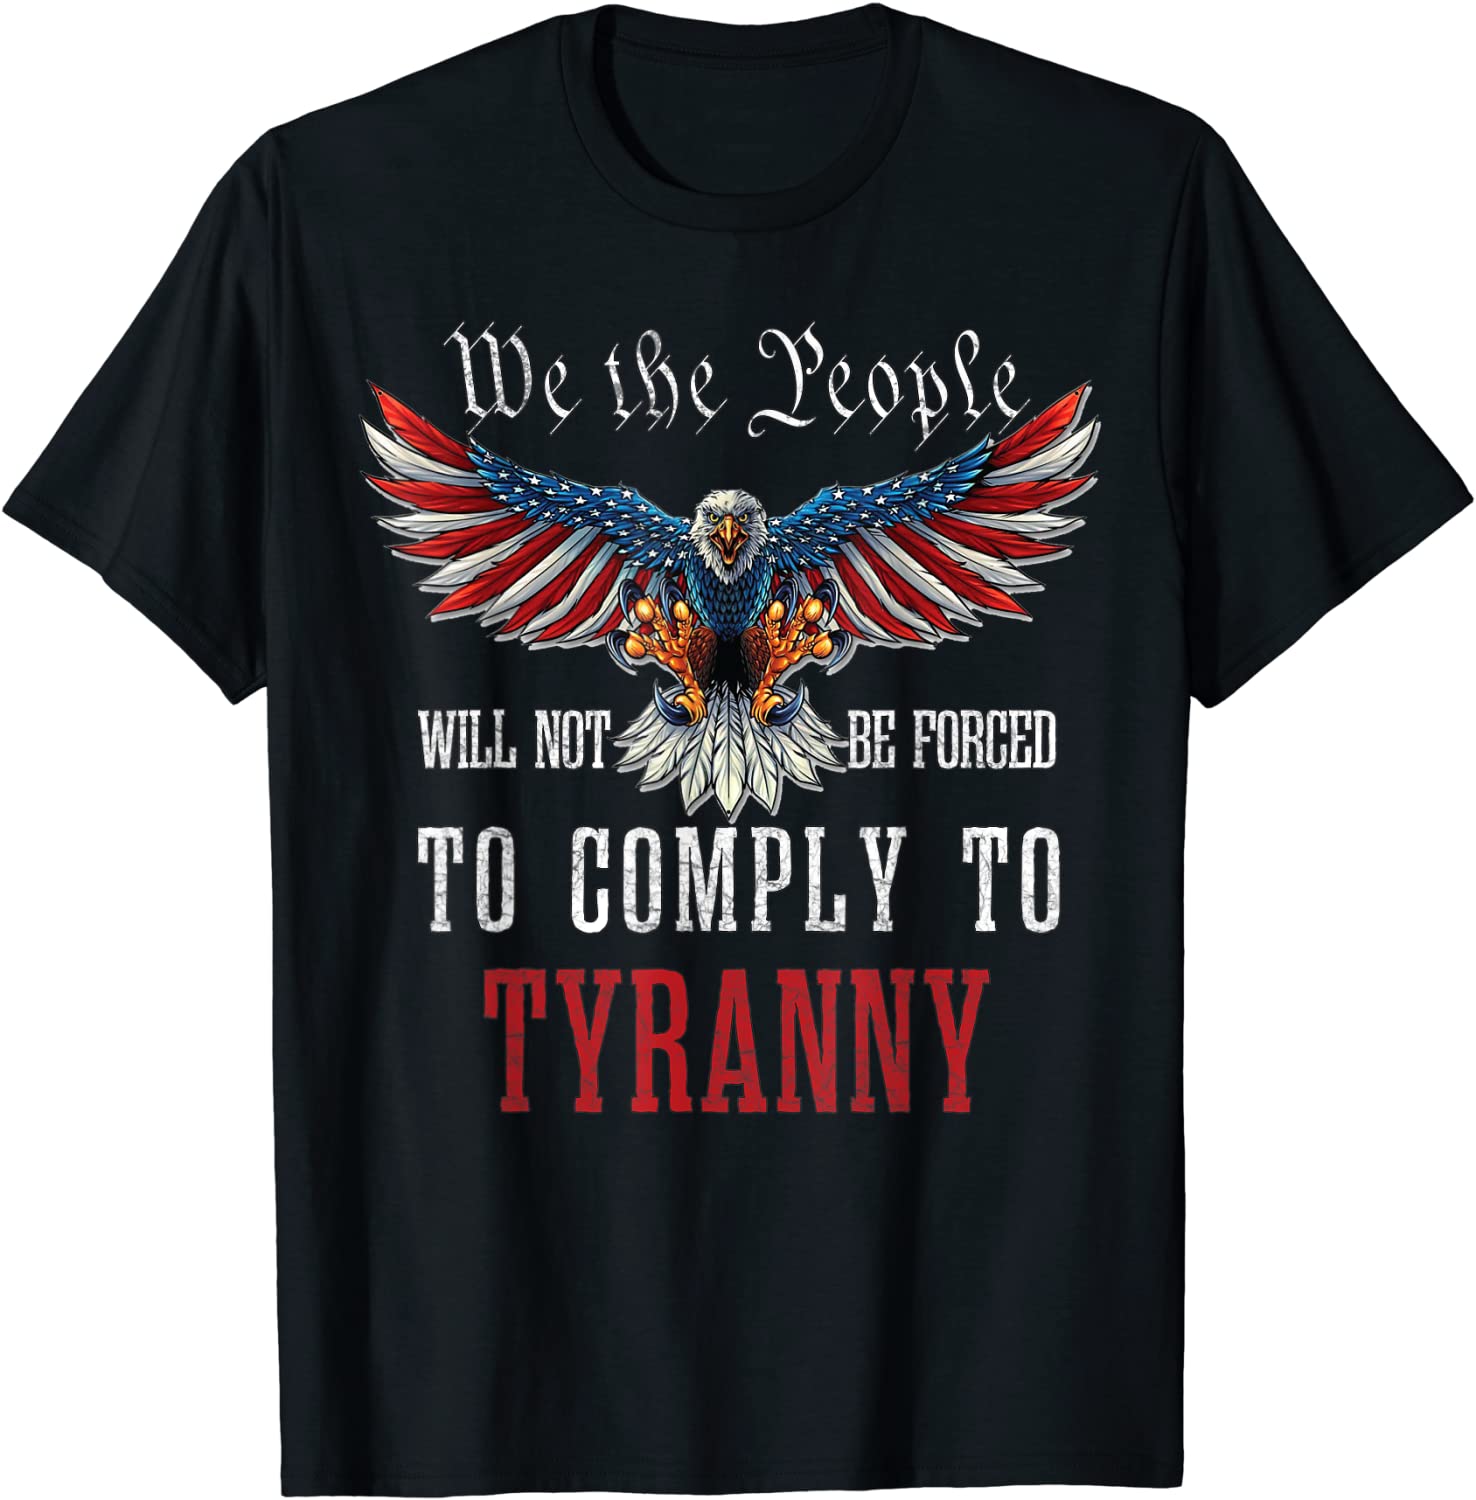 We The People Will Not Be Forced To Comply To Tyranny Tee Shirt ...